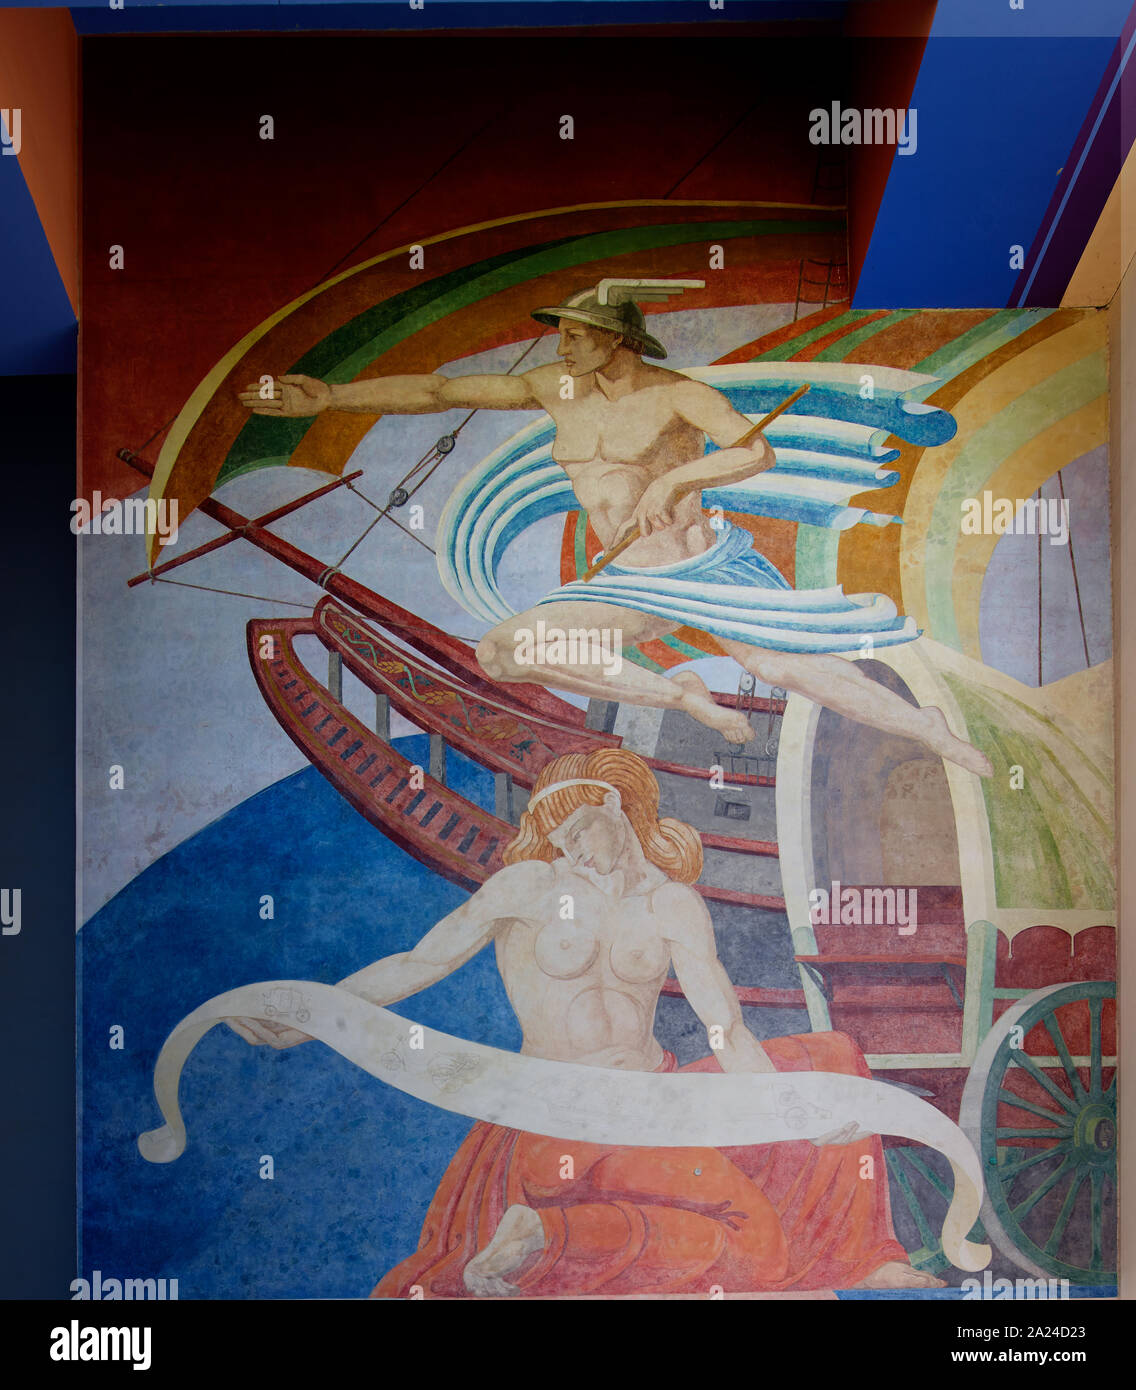 Part of a carefully restored mural, Old methods of Transportation by Carlo Ciampaglia, one of dozens at Fair Park, site of the 1936 Texas Centennial celebration and the Pan-American Exposition in 1937 in Dallas, Texas Stock Photo